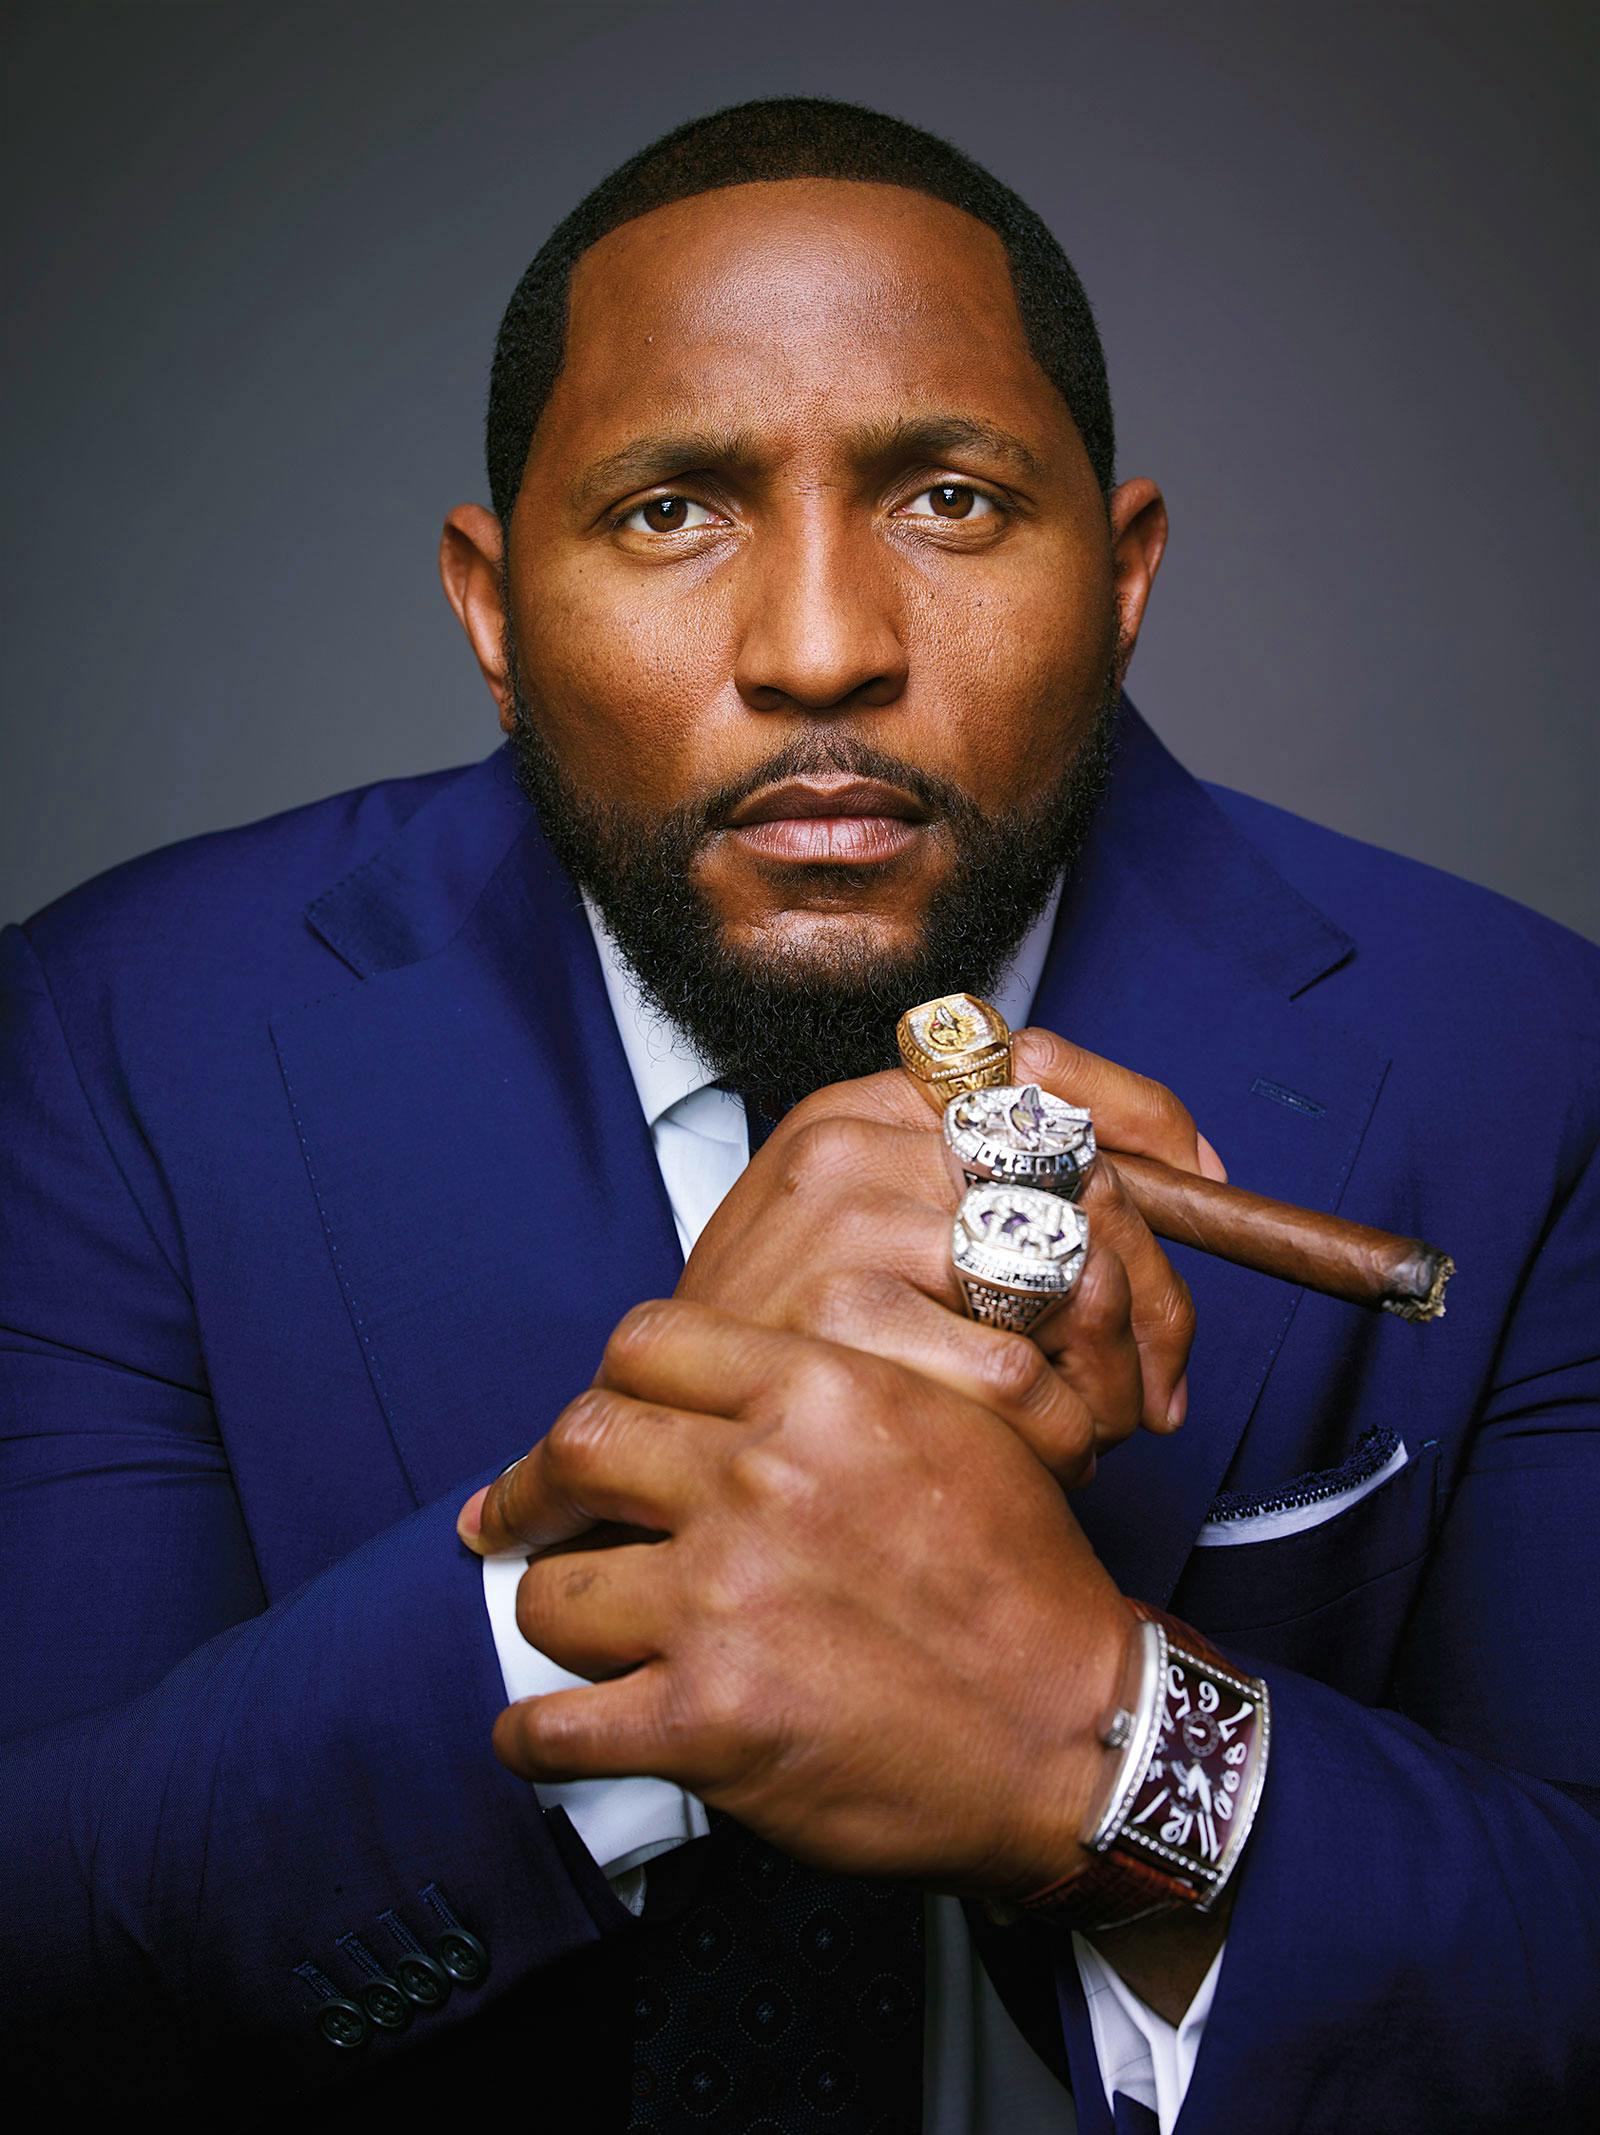 An Interview With Ray Lewis